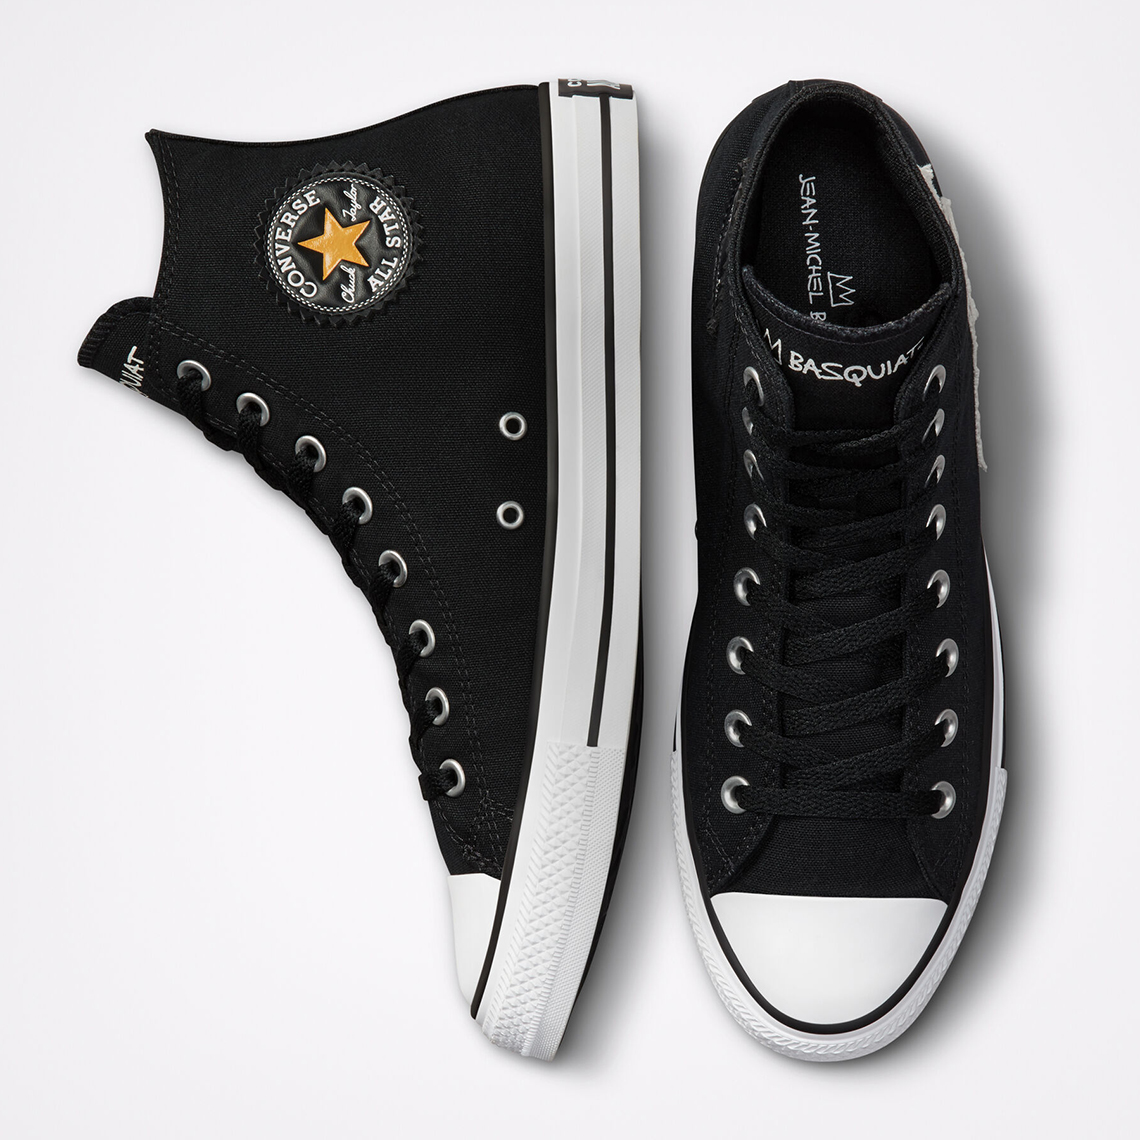 Basquiat Converse suede Chuck Taylor All Star 172586f Release Date 4